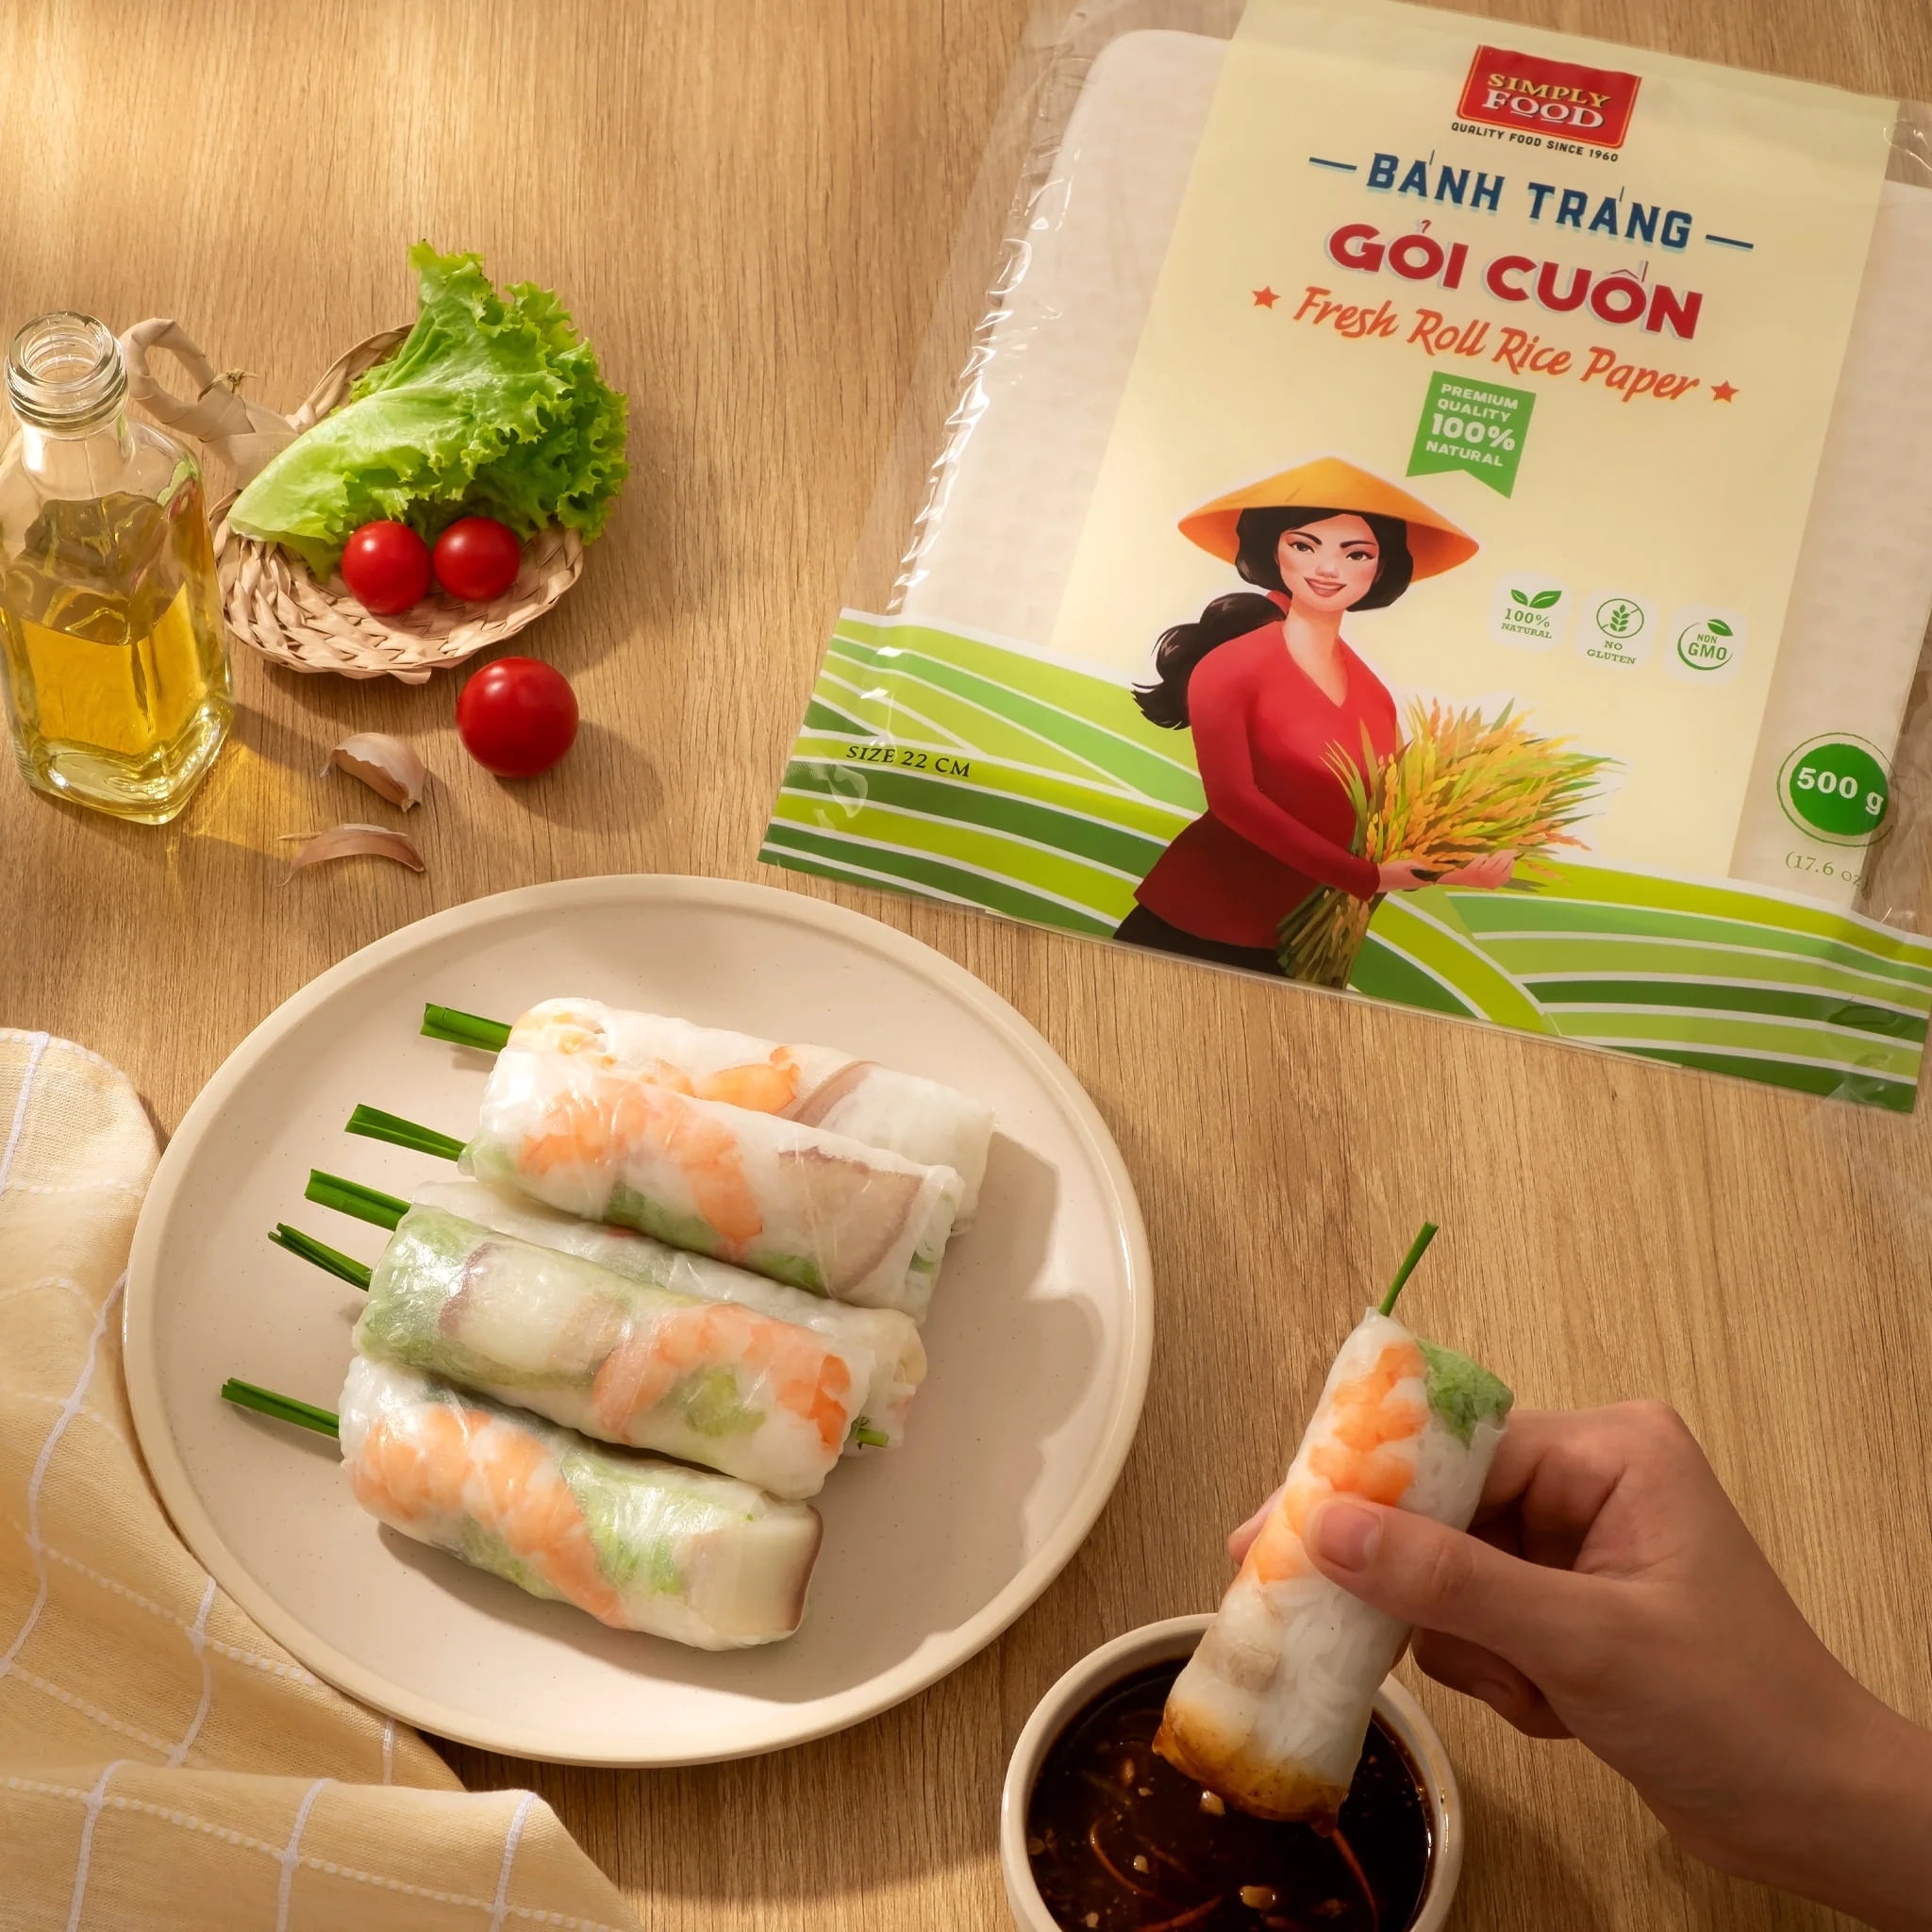 Spring Roll Rice Paper Wrappers (500g) Square-Shaped, Non-GMO, and  Gluten-Free by Simply Food